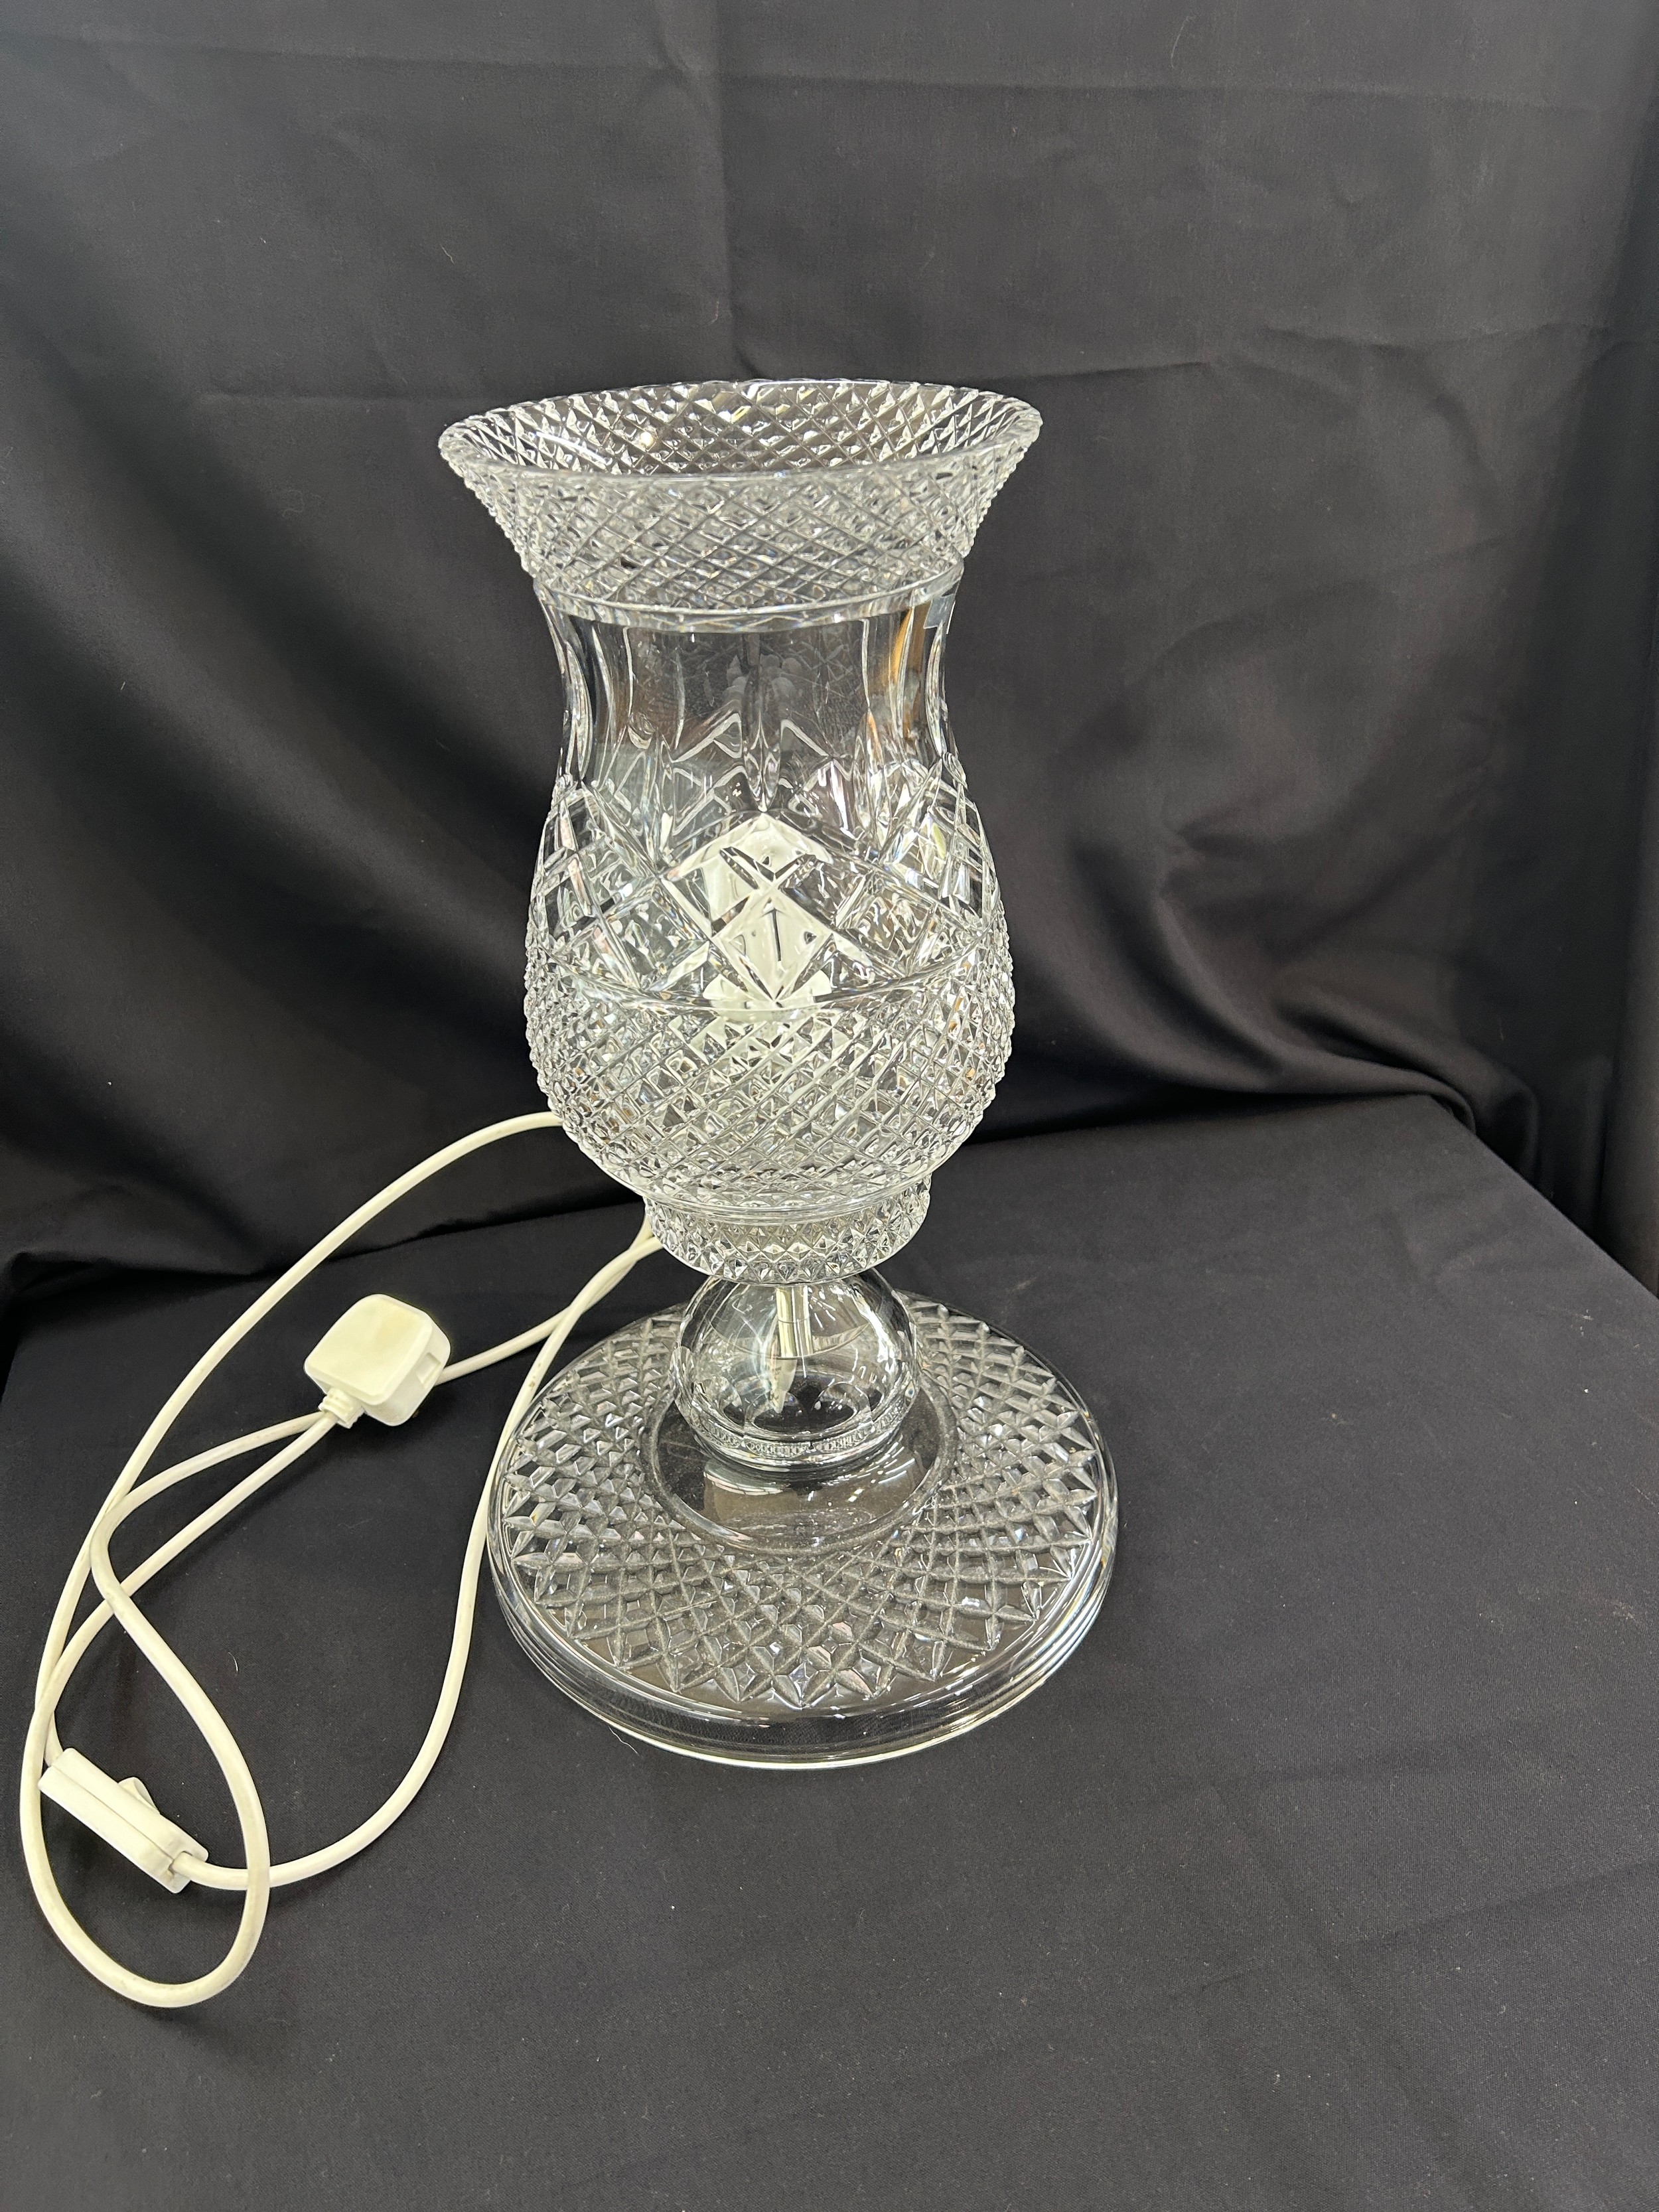 Cut glass table lamp measures approx 16 inches tall, diameter of base 10 inches